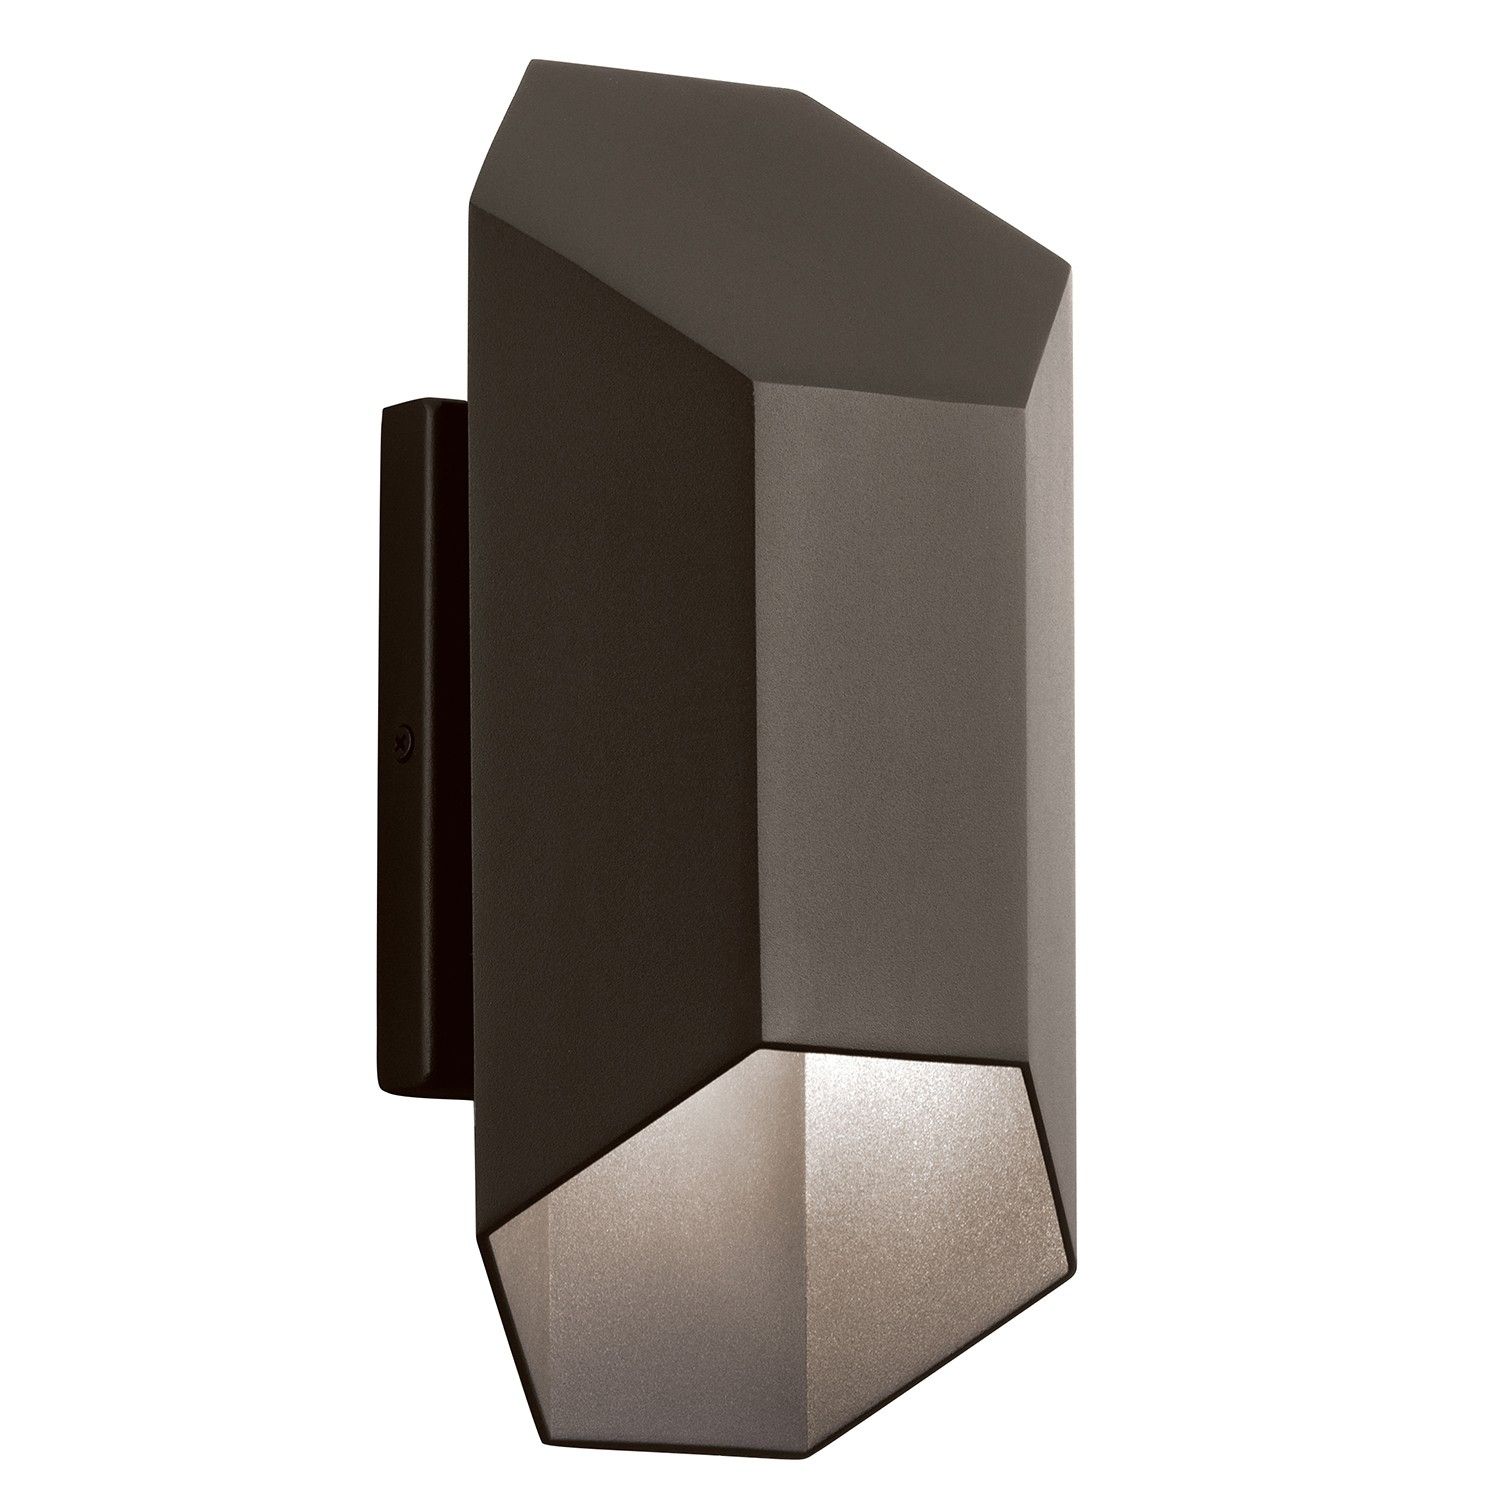 Estella 2 Light Led Outdoor Wall Light | Led Outdoor Wall Lights Within Outdoor Wall Sconce Led Lights (View 7 of 15)